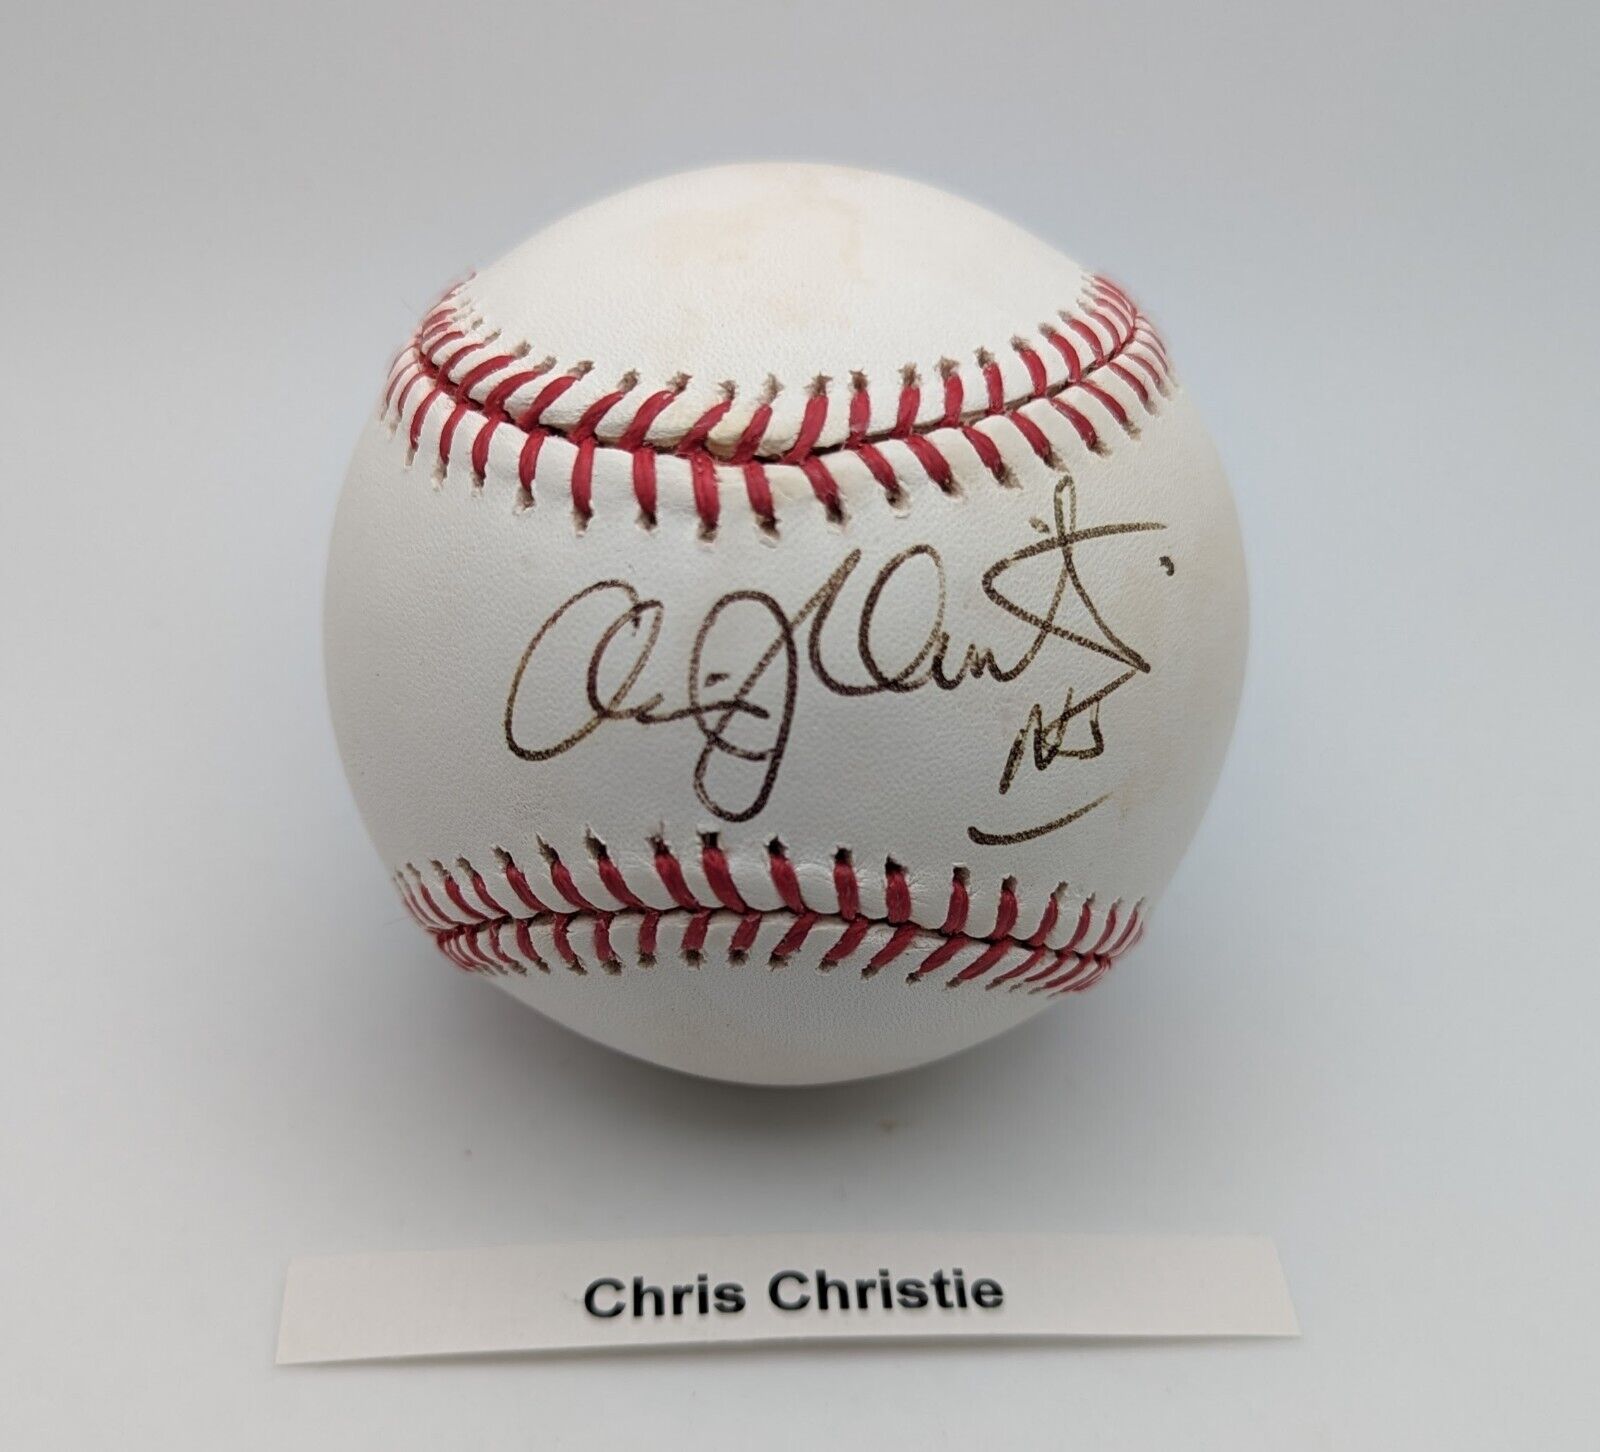 Chris Christie Autographed Baseball - President Candidate - New Jersey Governor